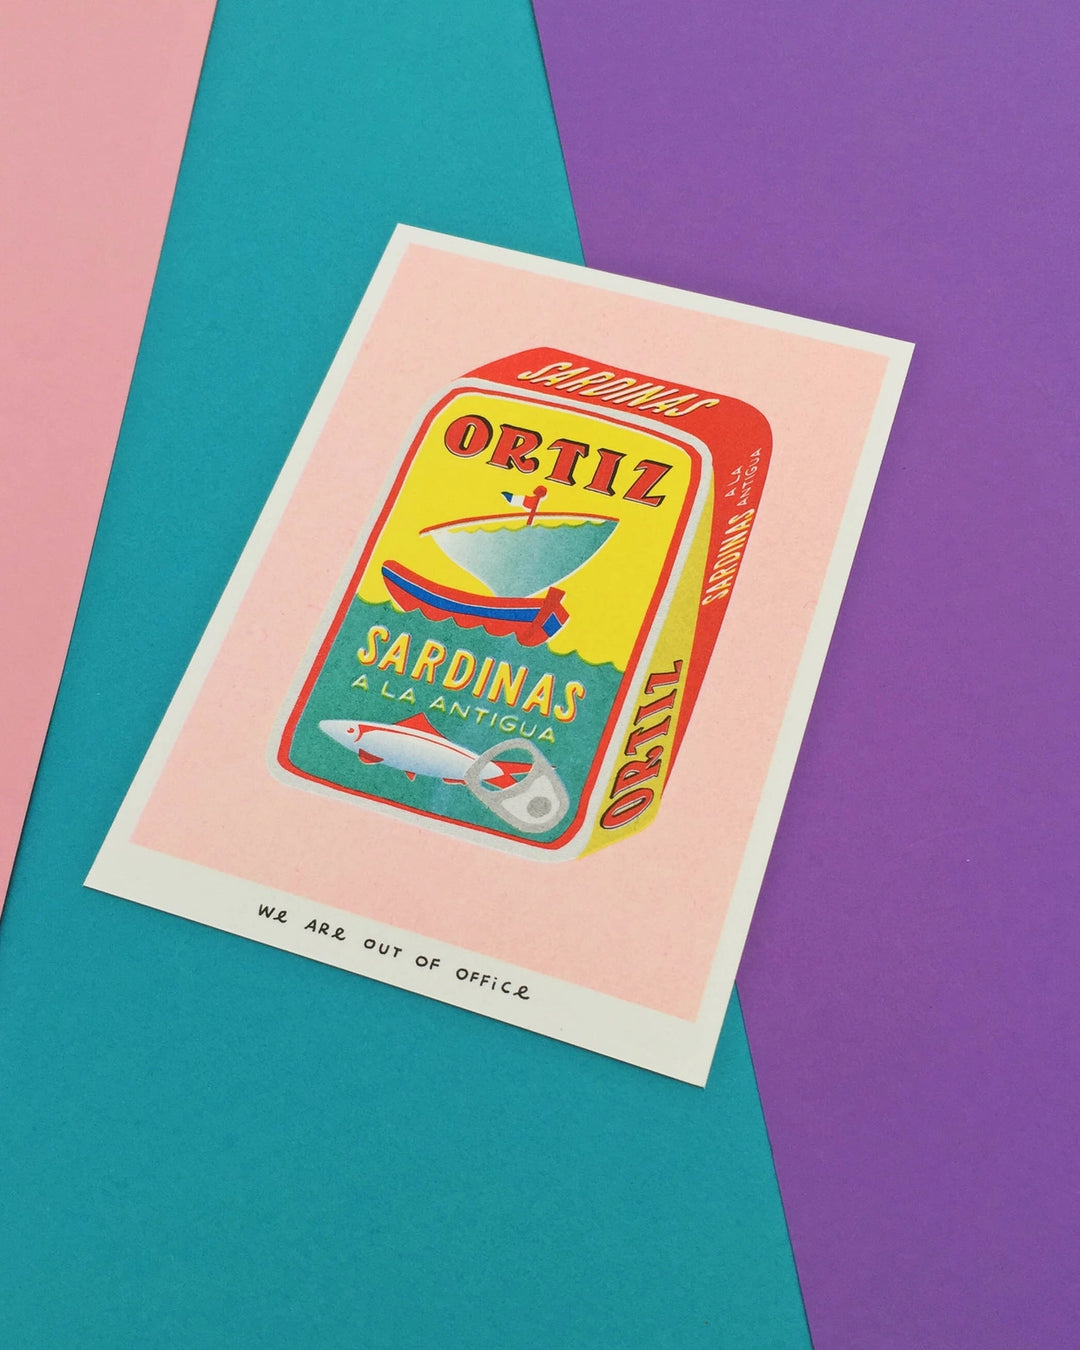 We Are Out Of Office - A  Can Of Full Sardines Oritz - Print